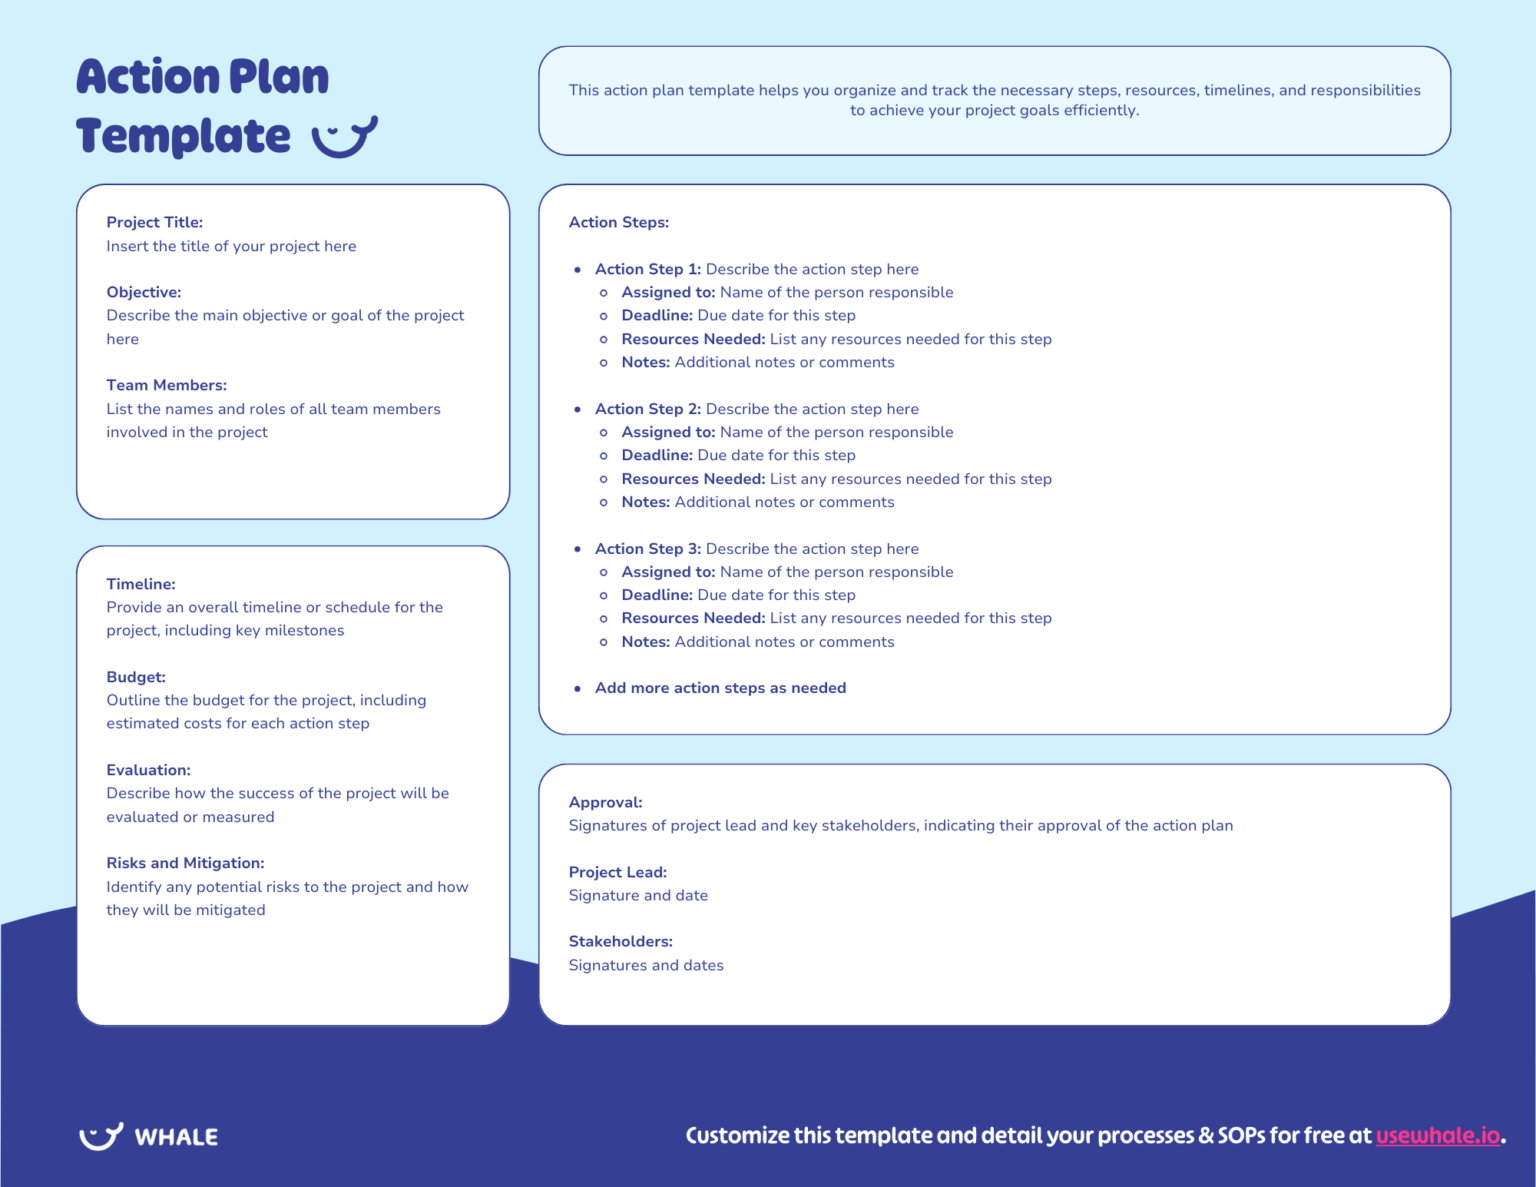 Action Plan Template with sections for project details, timeline, budget, risks, action steps, approval, project lead, and stakeholders. Includes step-by-step instructions for each action step.